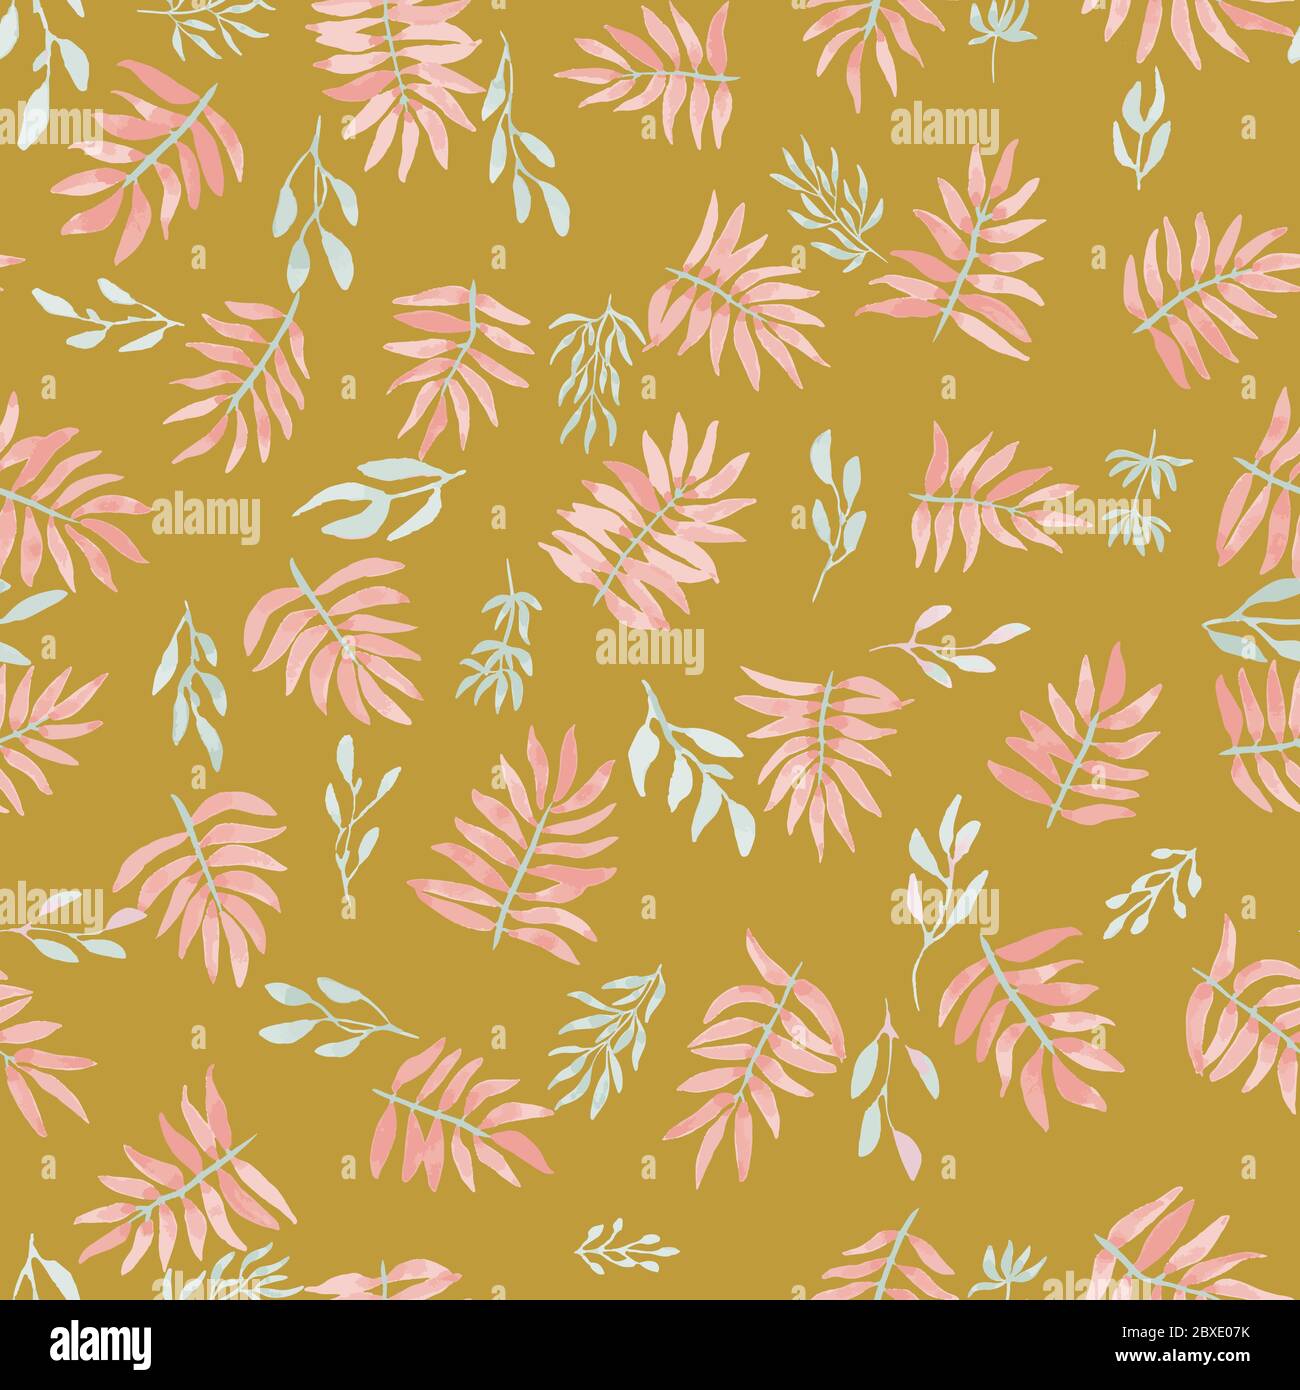 Mustard golden with pink tropical seamless pattern with leaves of plants, made in watercolor style. Botanical, environmental background with different Stock Vector